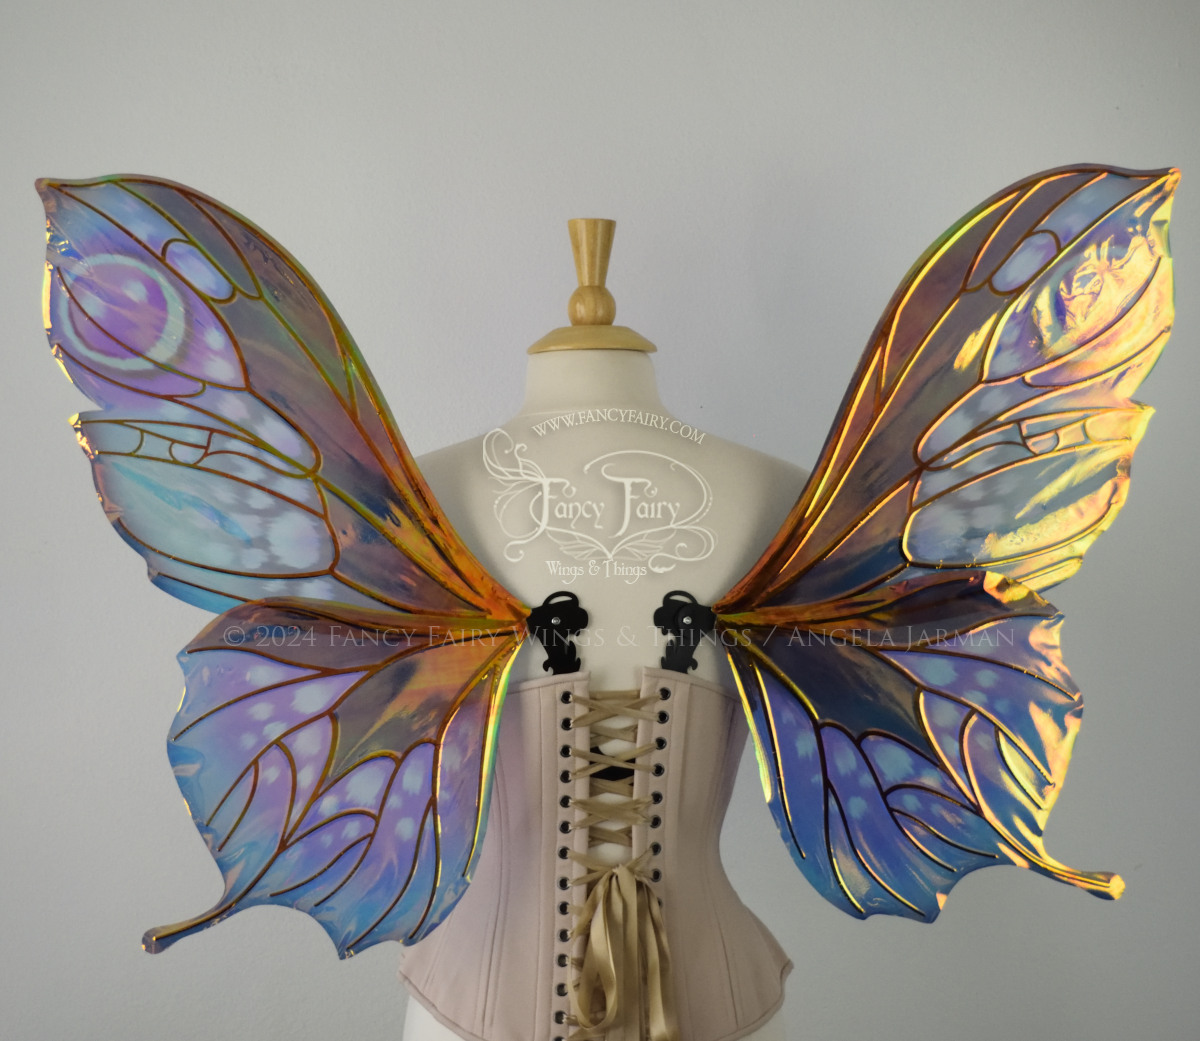 Back view of butterfly shaped iridescent wings in shades of teal with pink and lavender accents with black veins, worn on a dressform